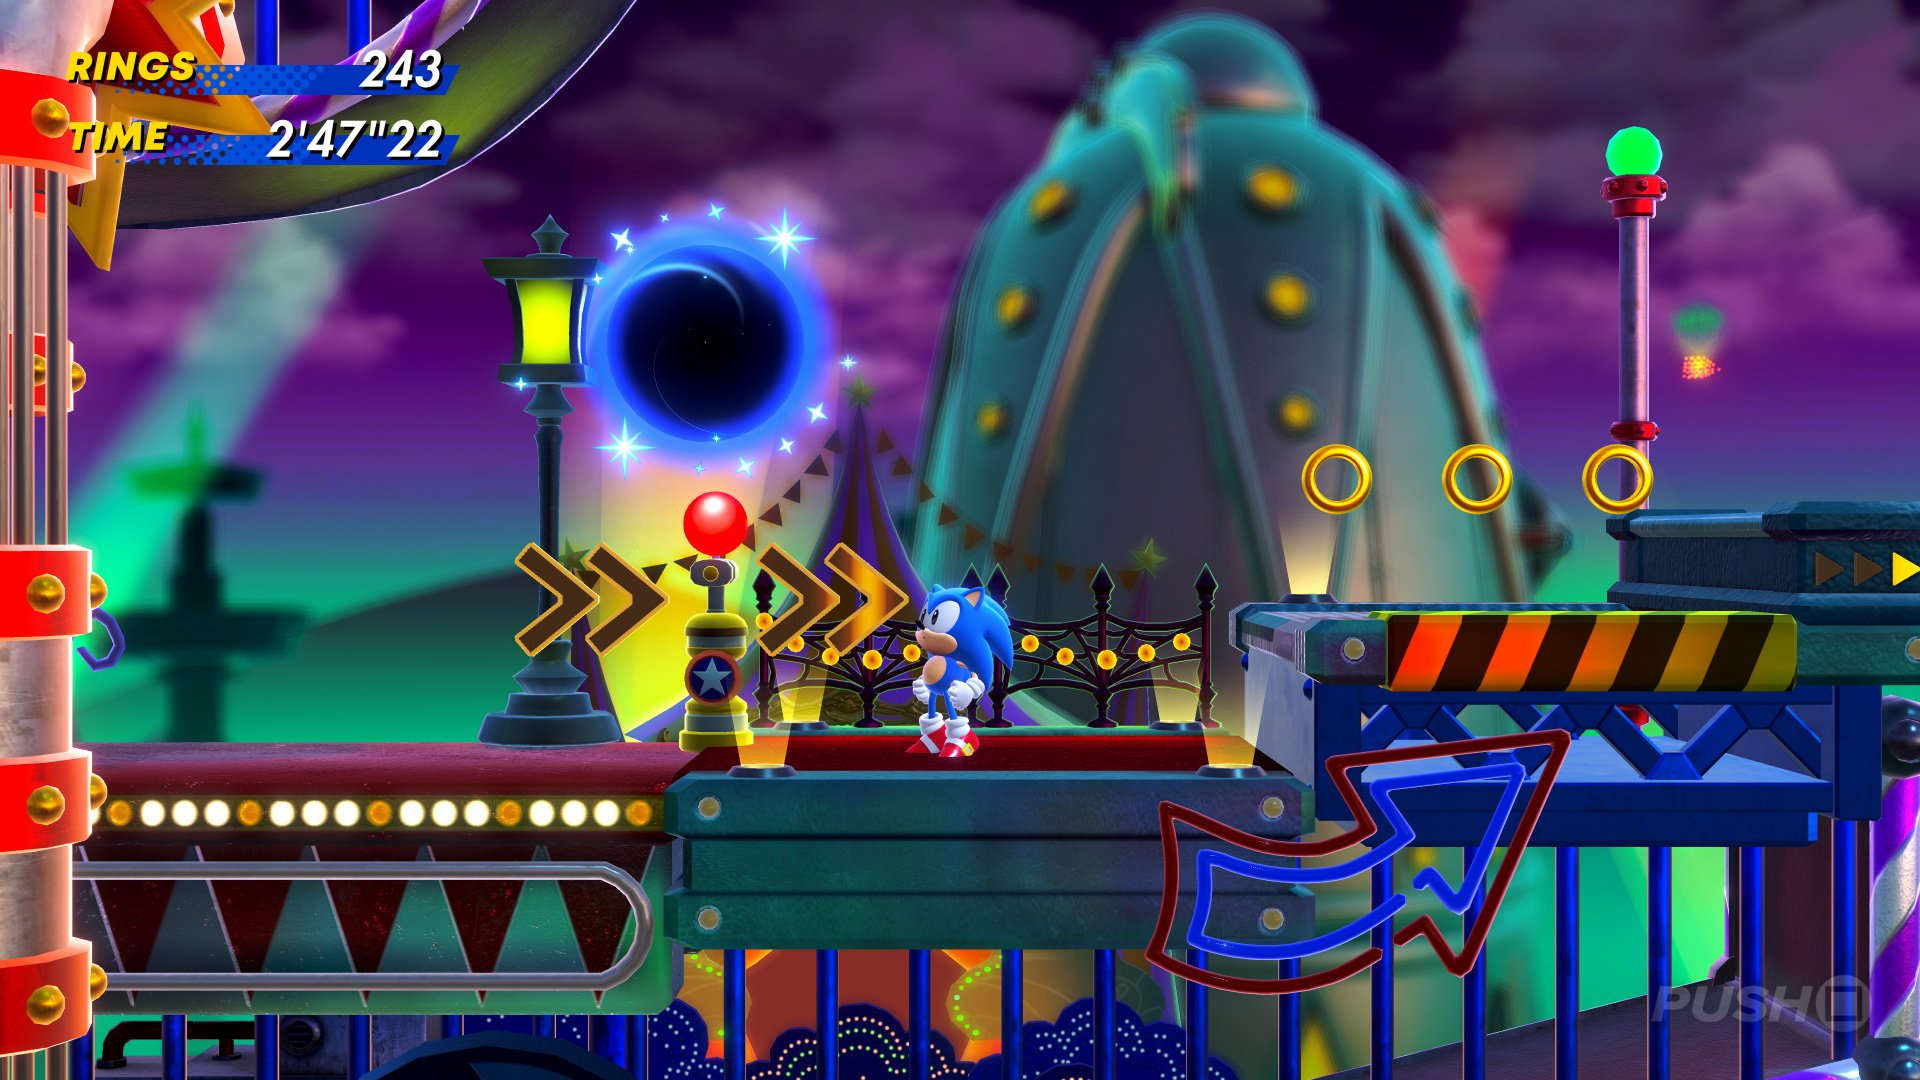 13 Minutes of Sonic Superstars Gameplay on PS5 